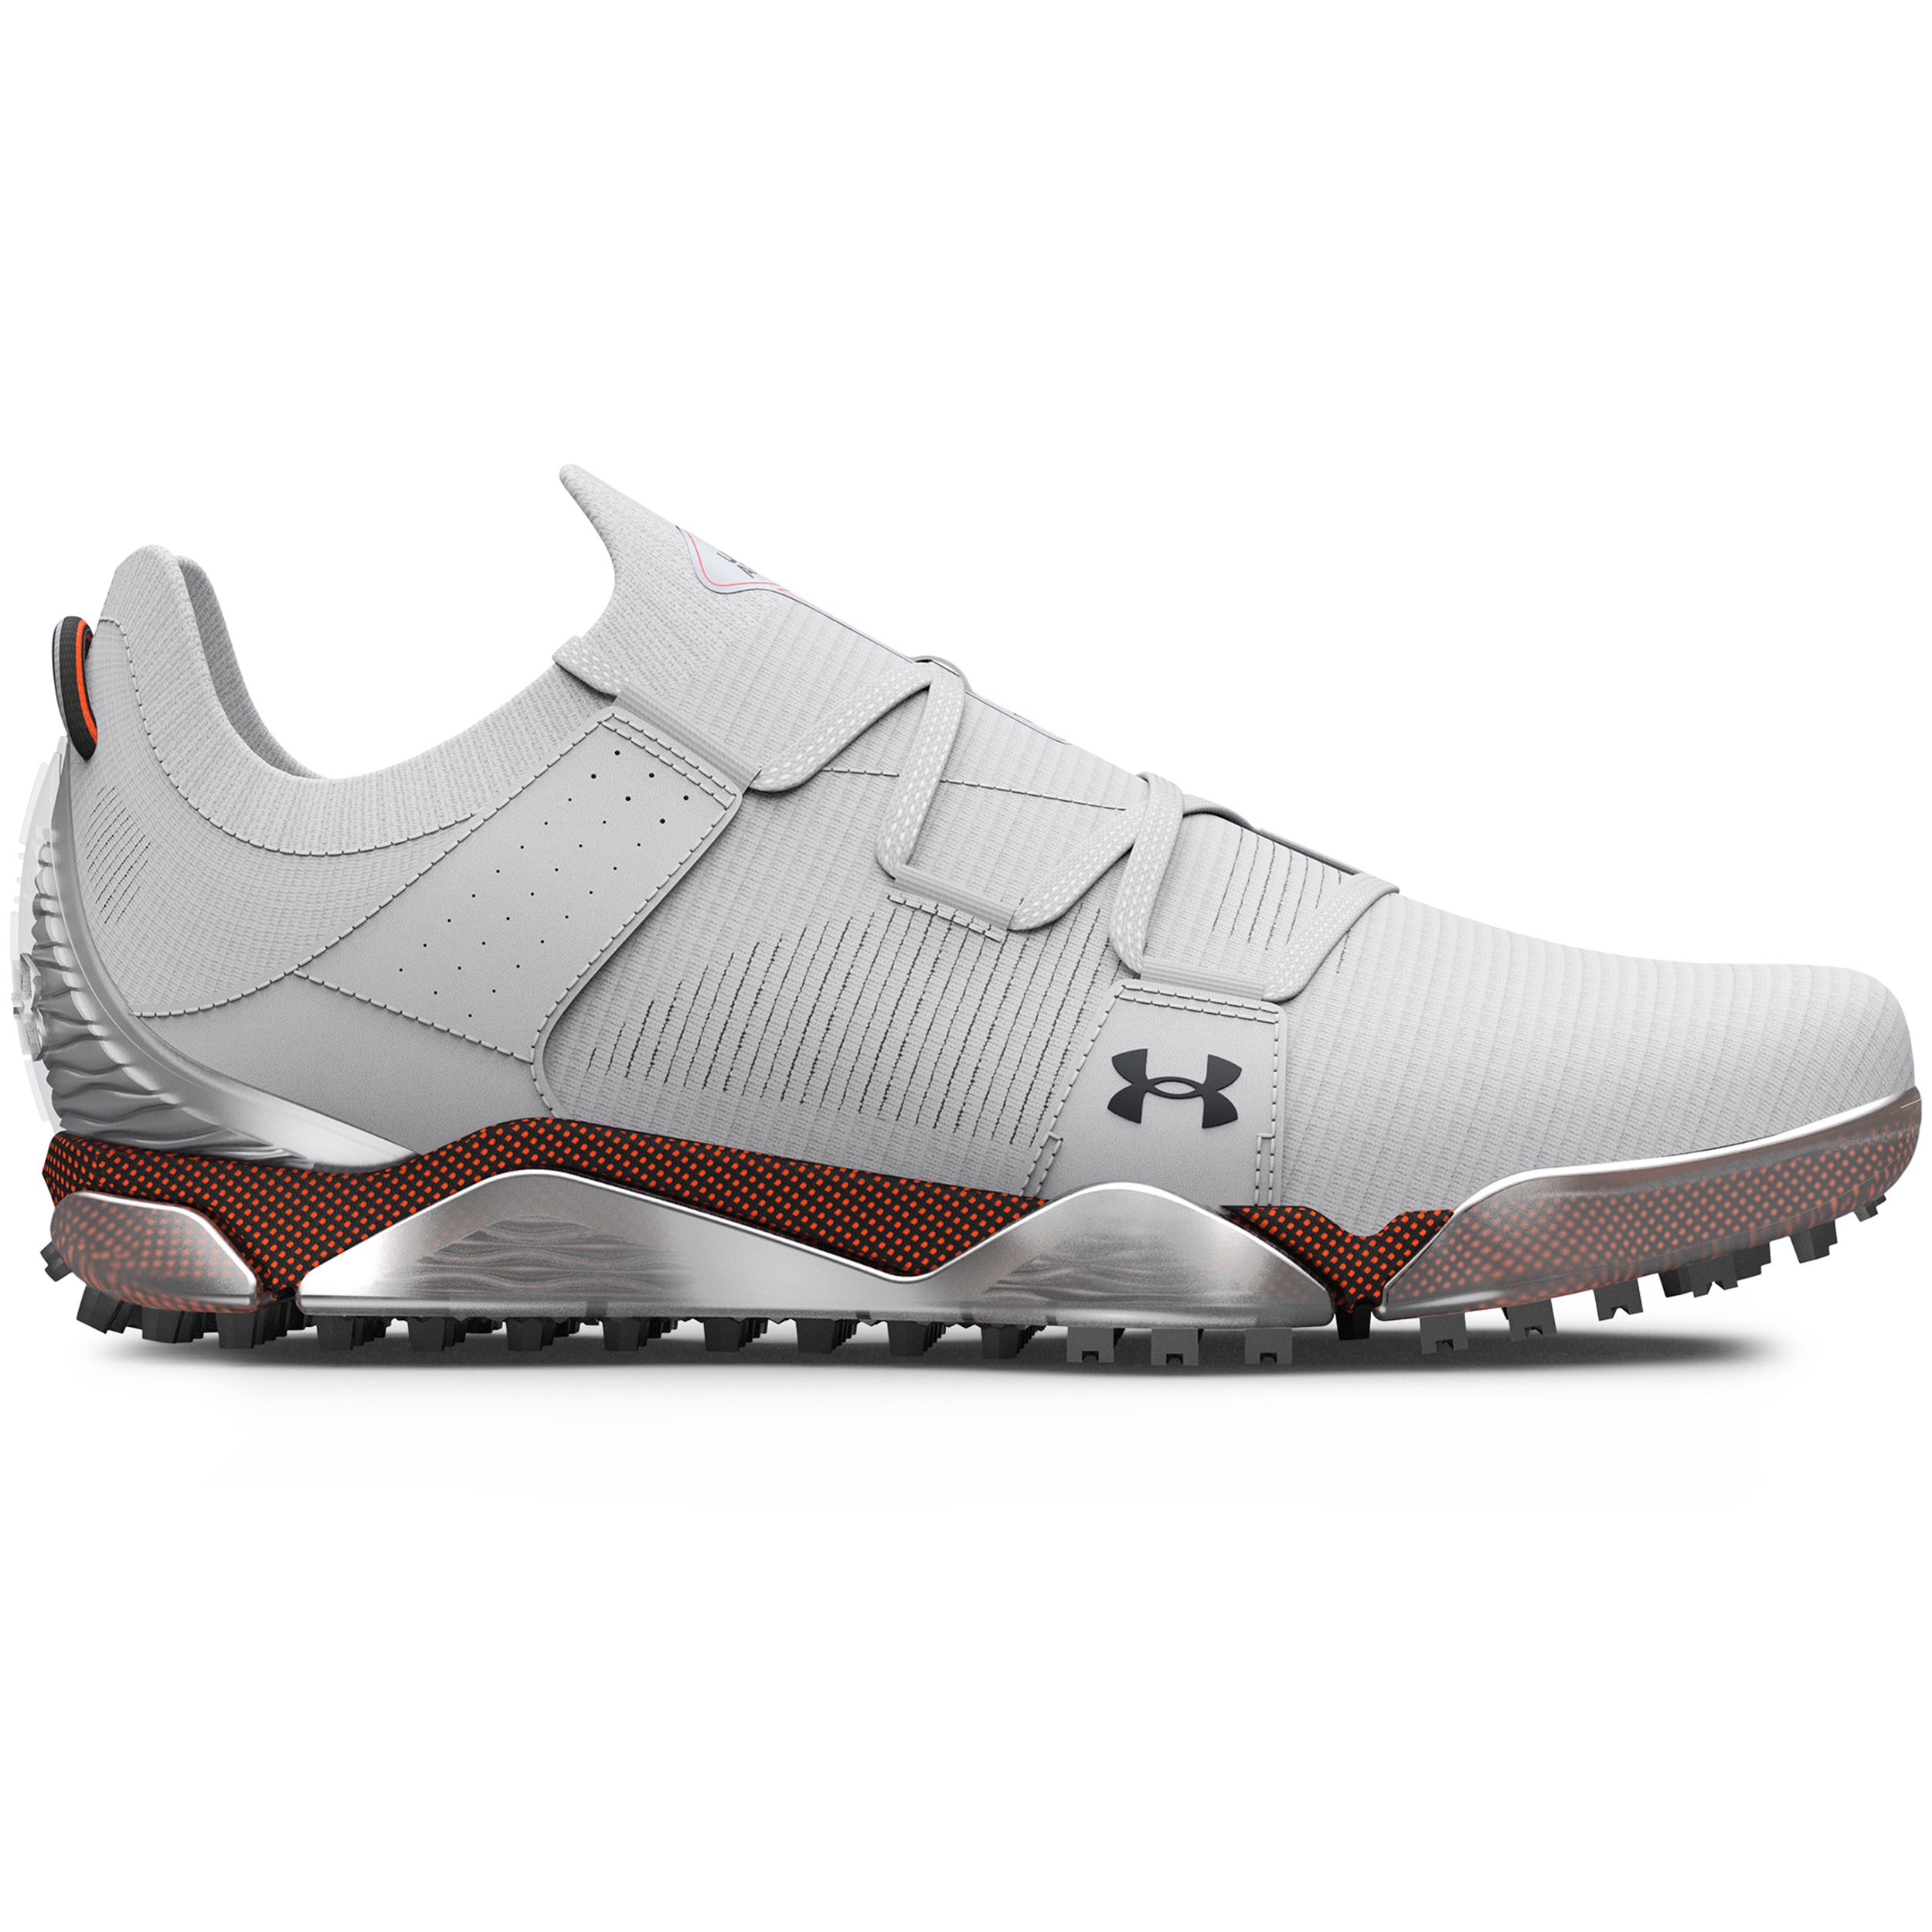 Groen laat staan tuin Under Armour HOVR Tour SL E Golf Shoes 3025744 Halo Grey Afterburn 102 |  Function18